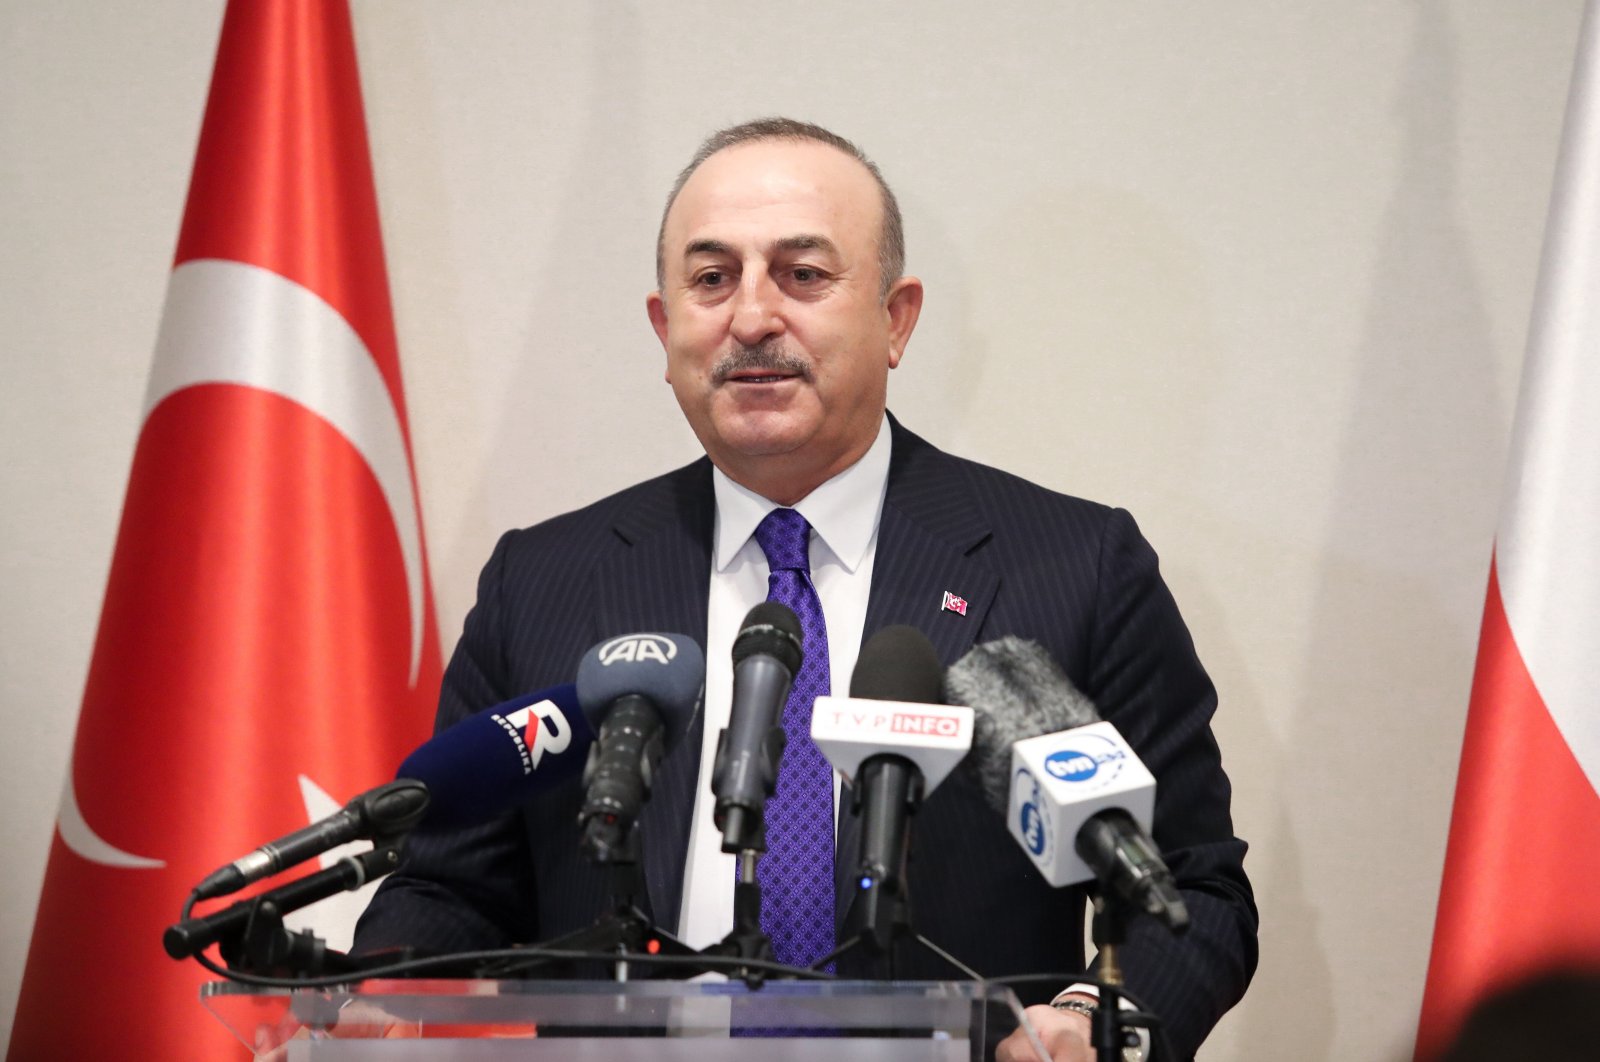 Foreign Minister Mevlüt Çavuşoğlu speaks during the opening ceremony of the Honorary Consulate of the Republic of Turkey in Lodz, Poland, Nov. 30, 2022. (EPA Photo)